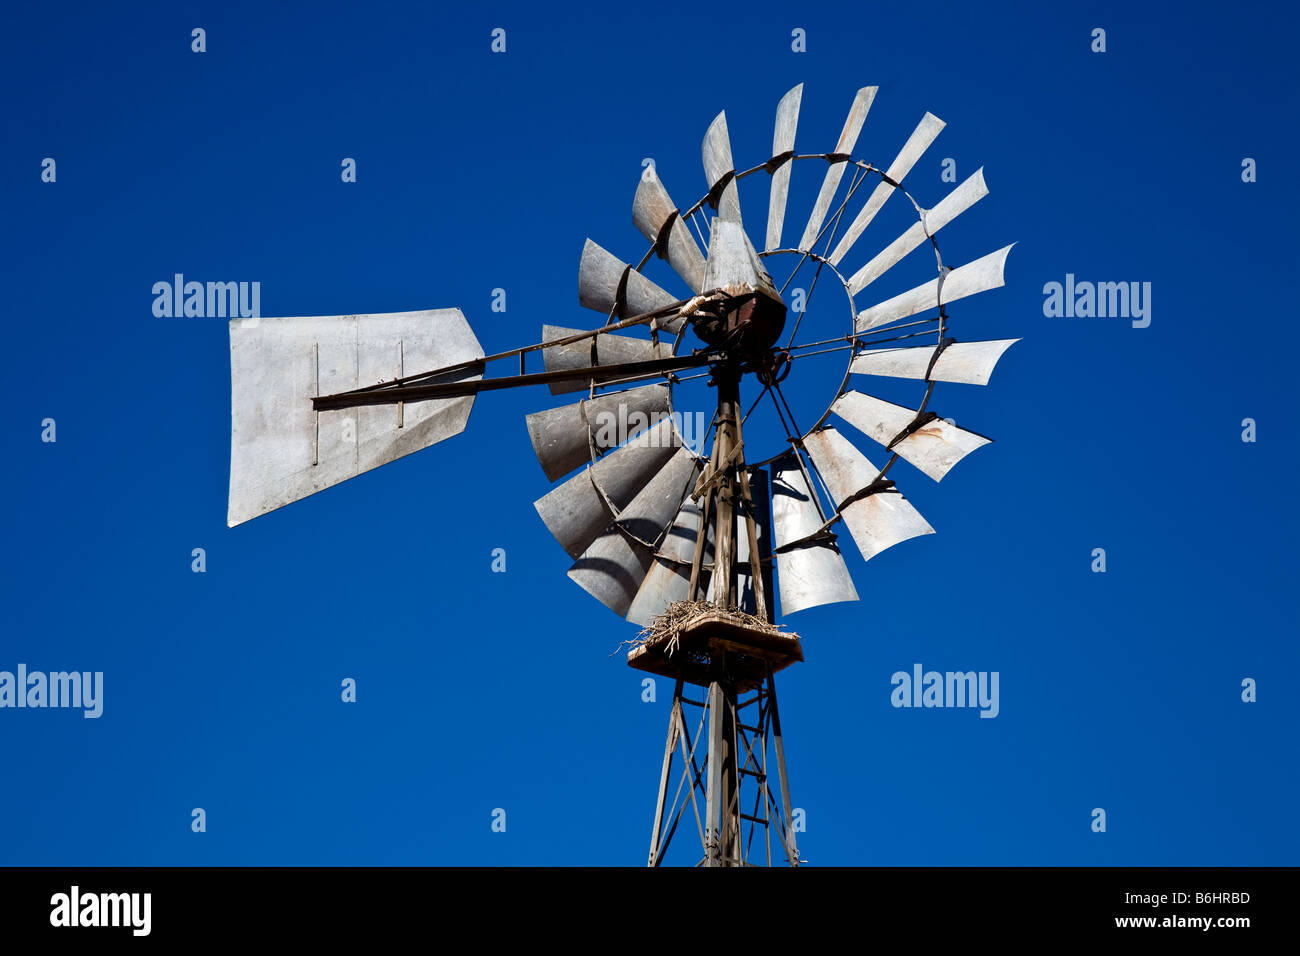 Wind pump against a clear blue sky Stock Photo